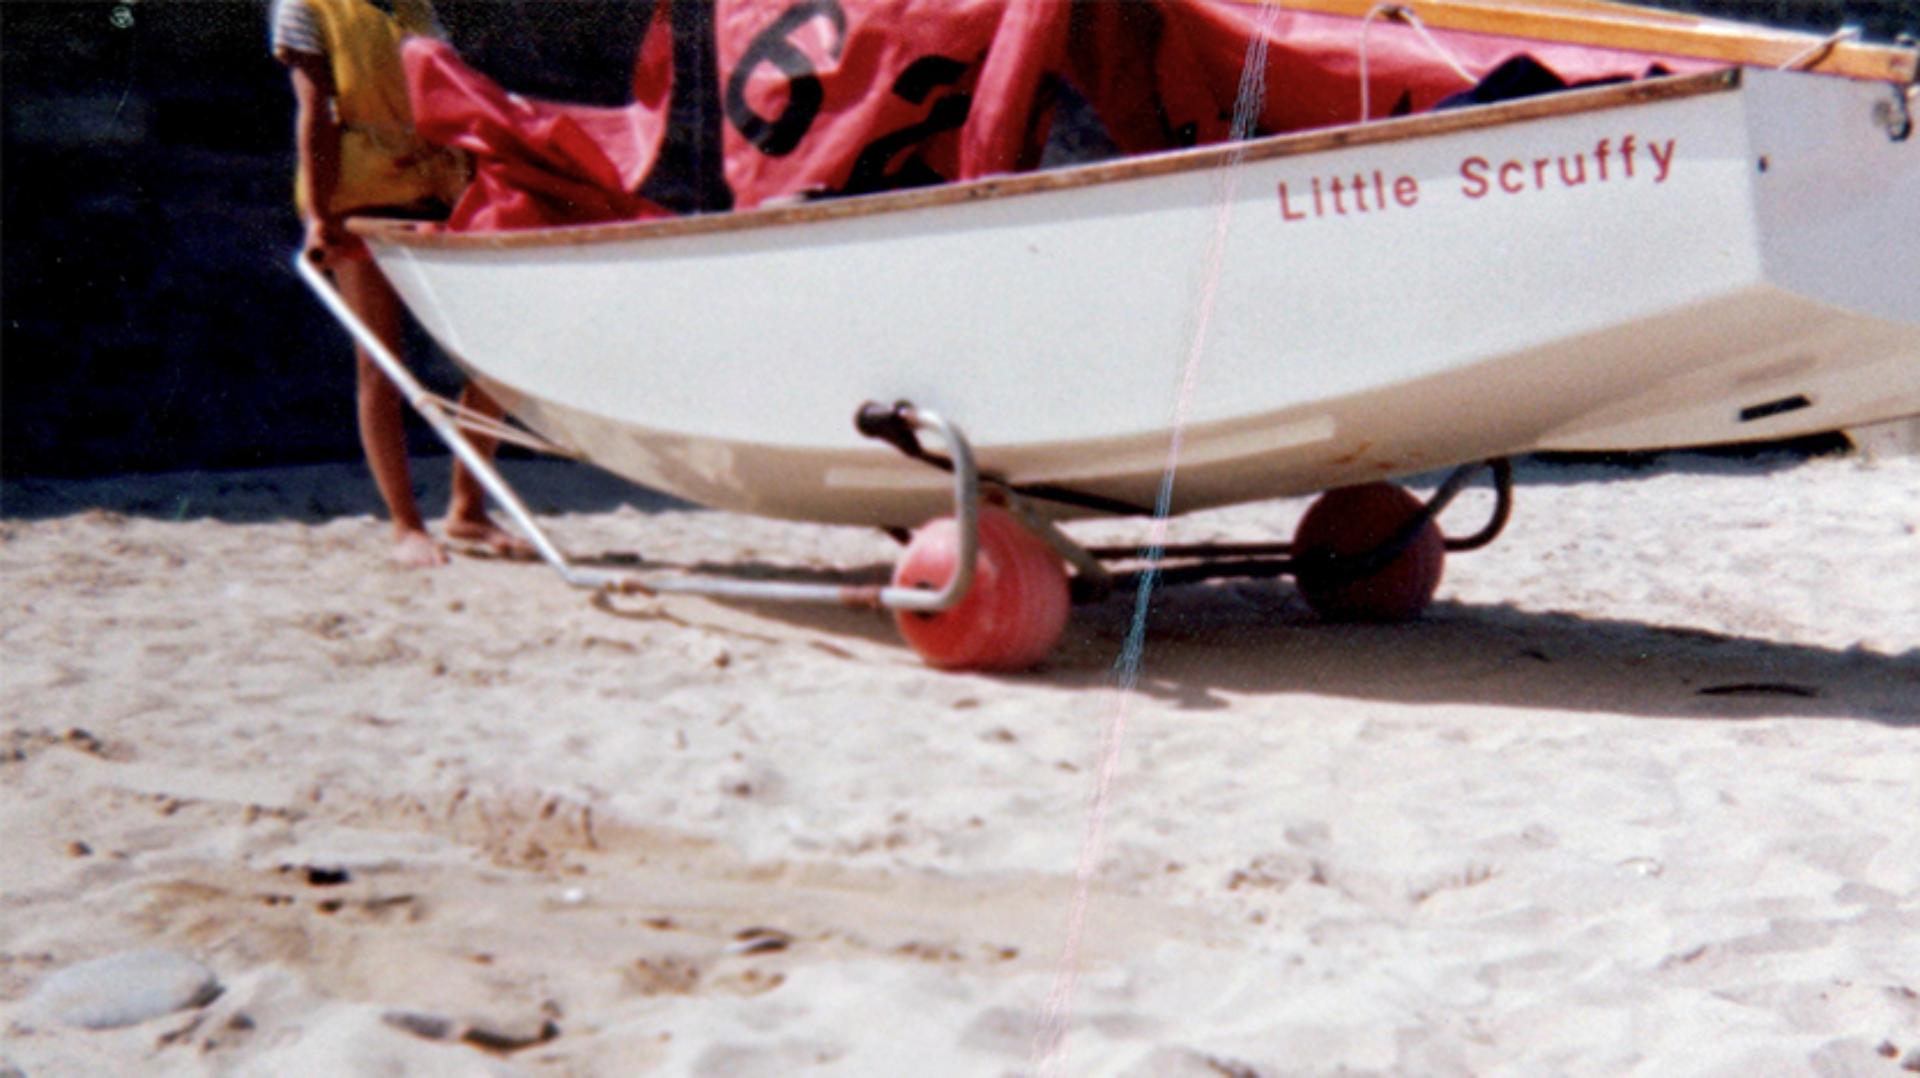 A side view of a small boat, sitting on a Trolleyball frame